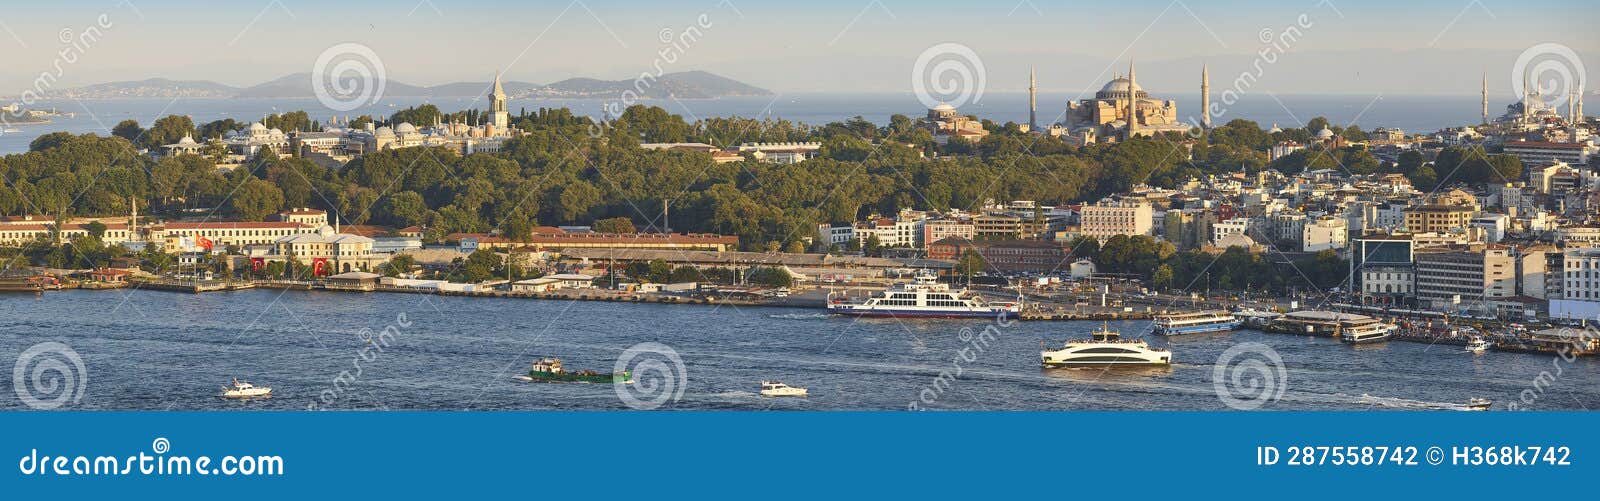 istanbul panoramic view. orient and occident seaside. marmara sea. turkey